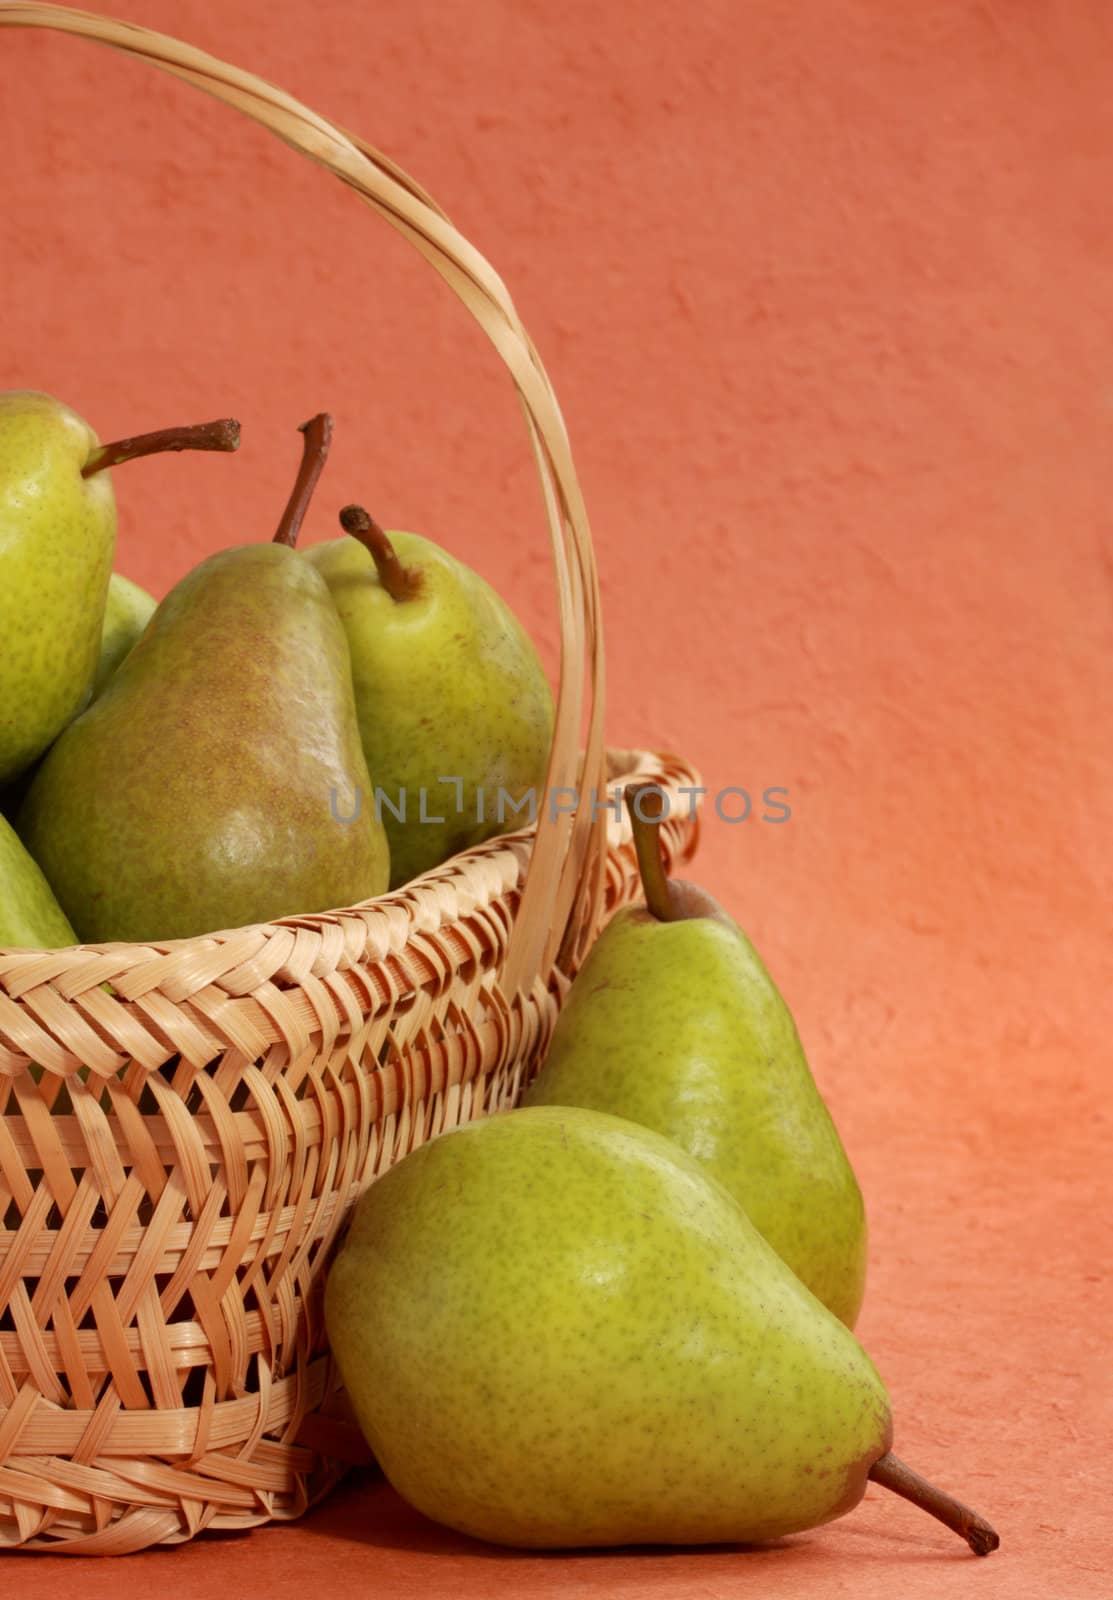 pear's basket by lanalanglois